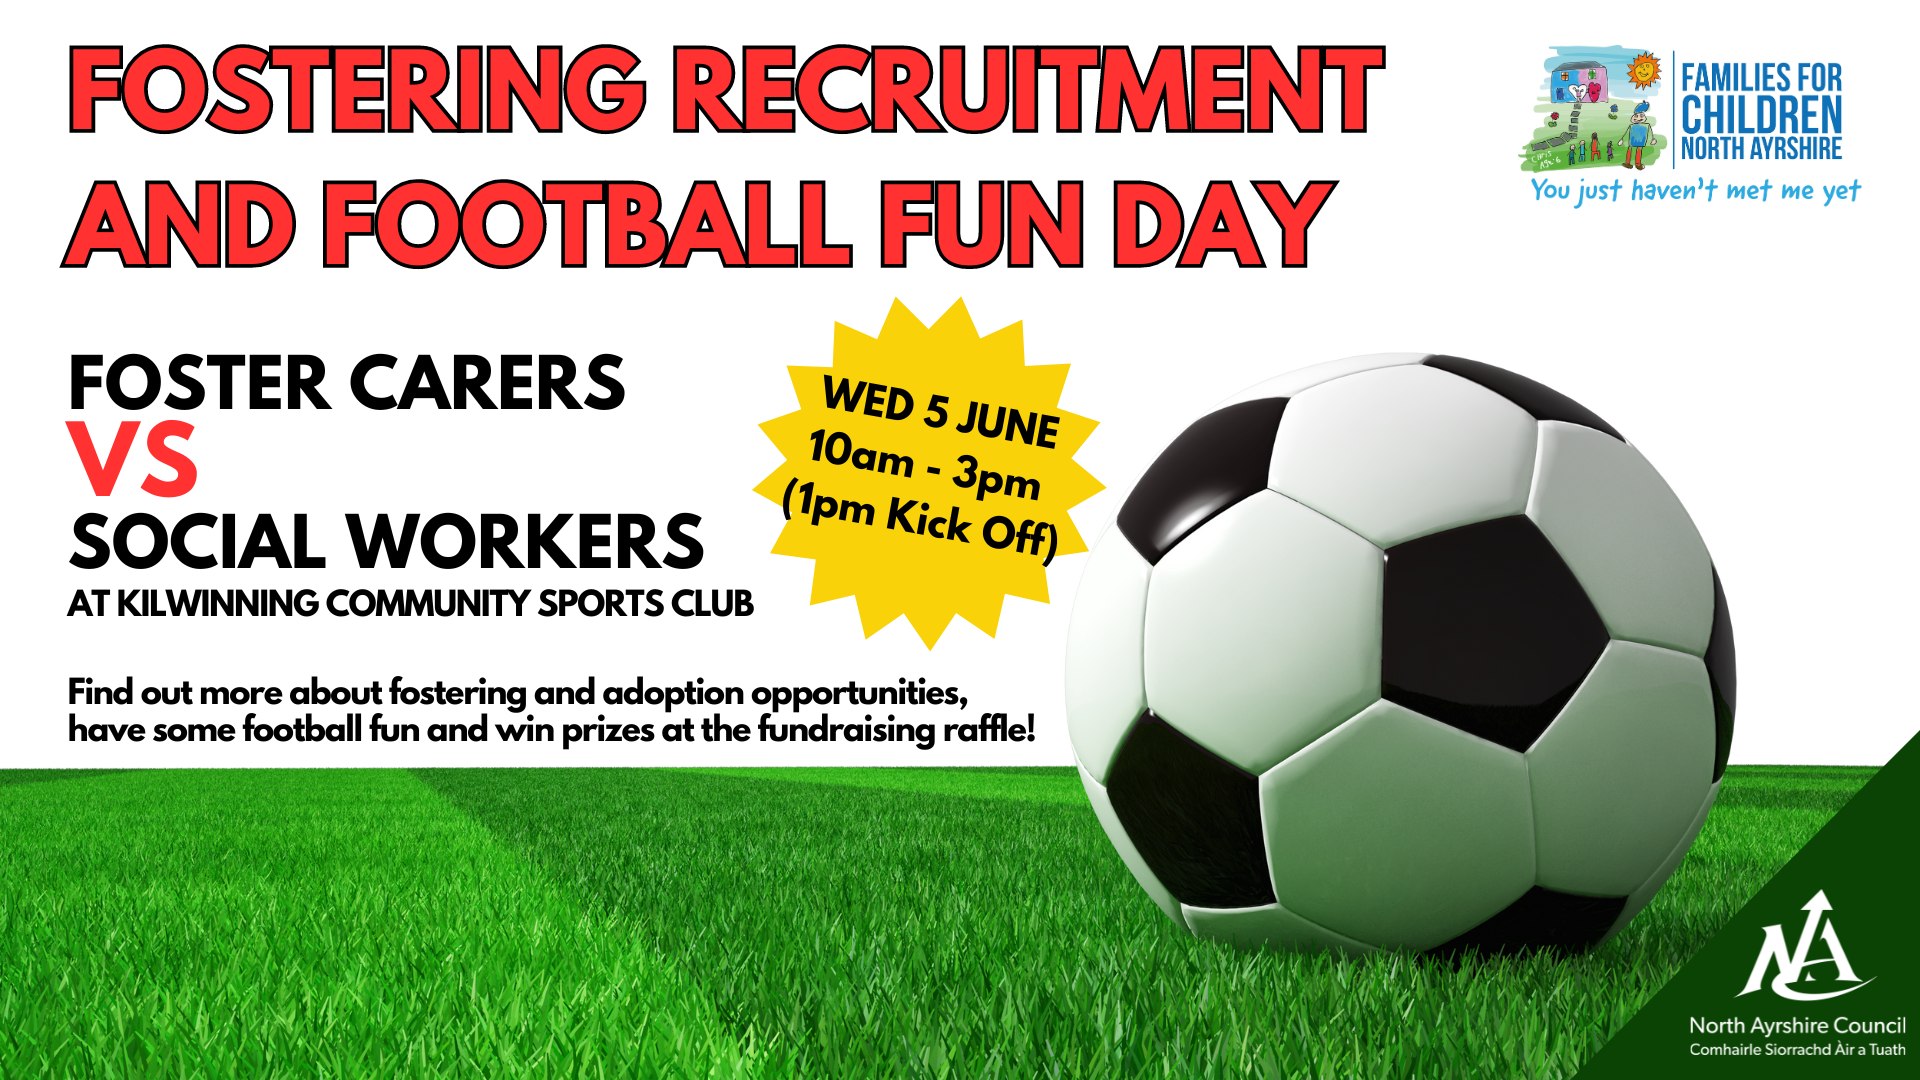 Fostering Recruitment and Football Fun Day - Wed 3 June 10am-3pm with Foster Carers VS Social Workers football match at 1pm and fundraising raffle.